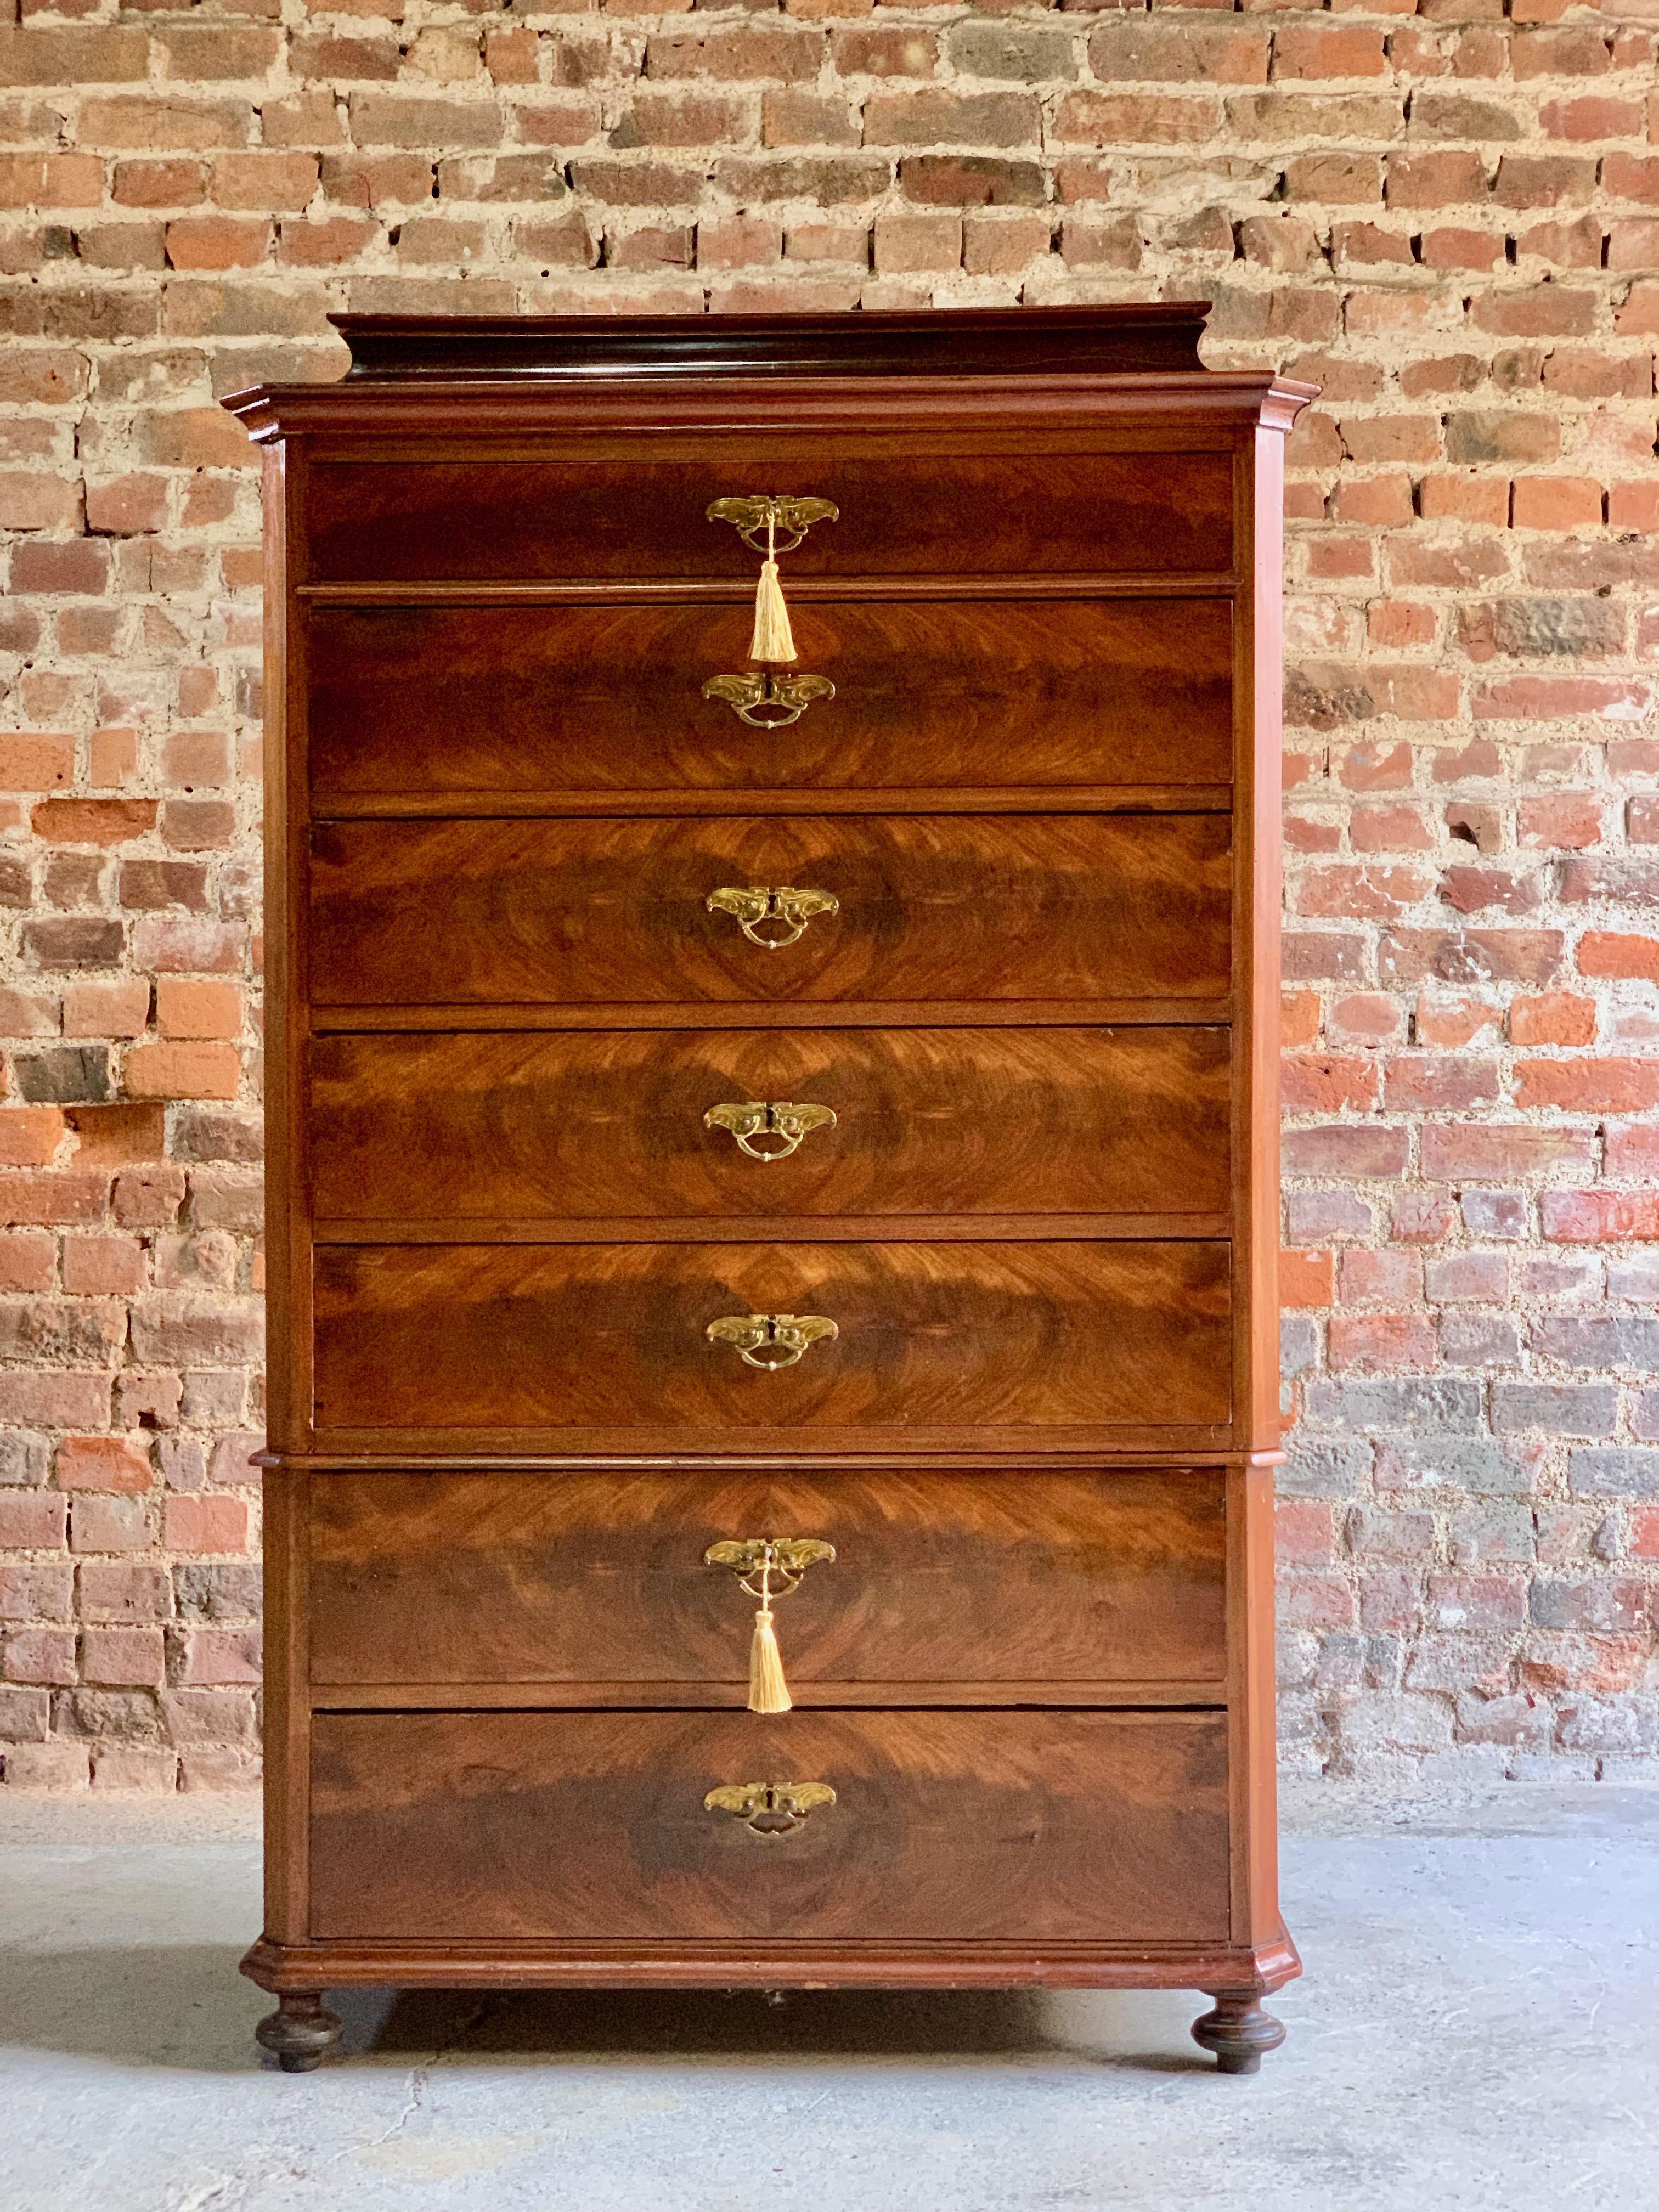 Antique Mahogany Tallboy Chest of Drawers 19th century Danish Biedermeier style

Magnificent Antique 19th century Danish Flame fronted Mahogany Tallboy chest of drawers in the Biedermeier style circa 1880, the canted top over seven graduated